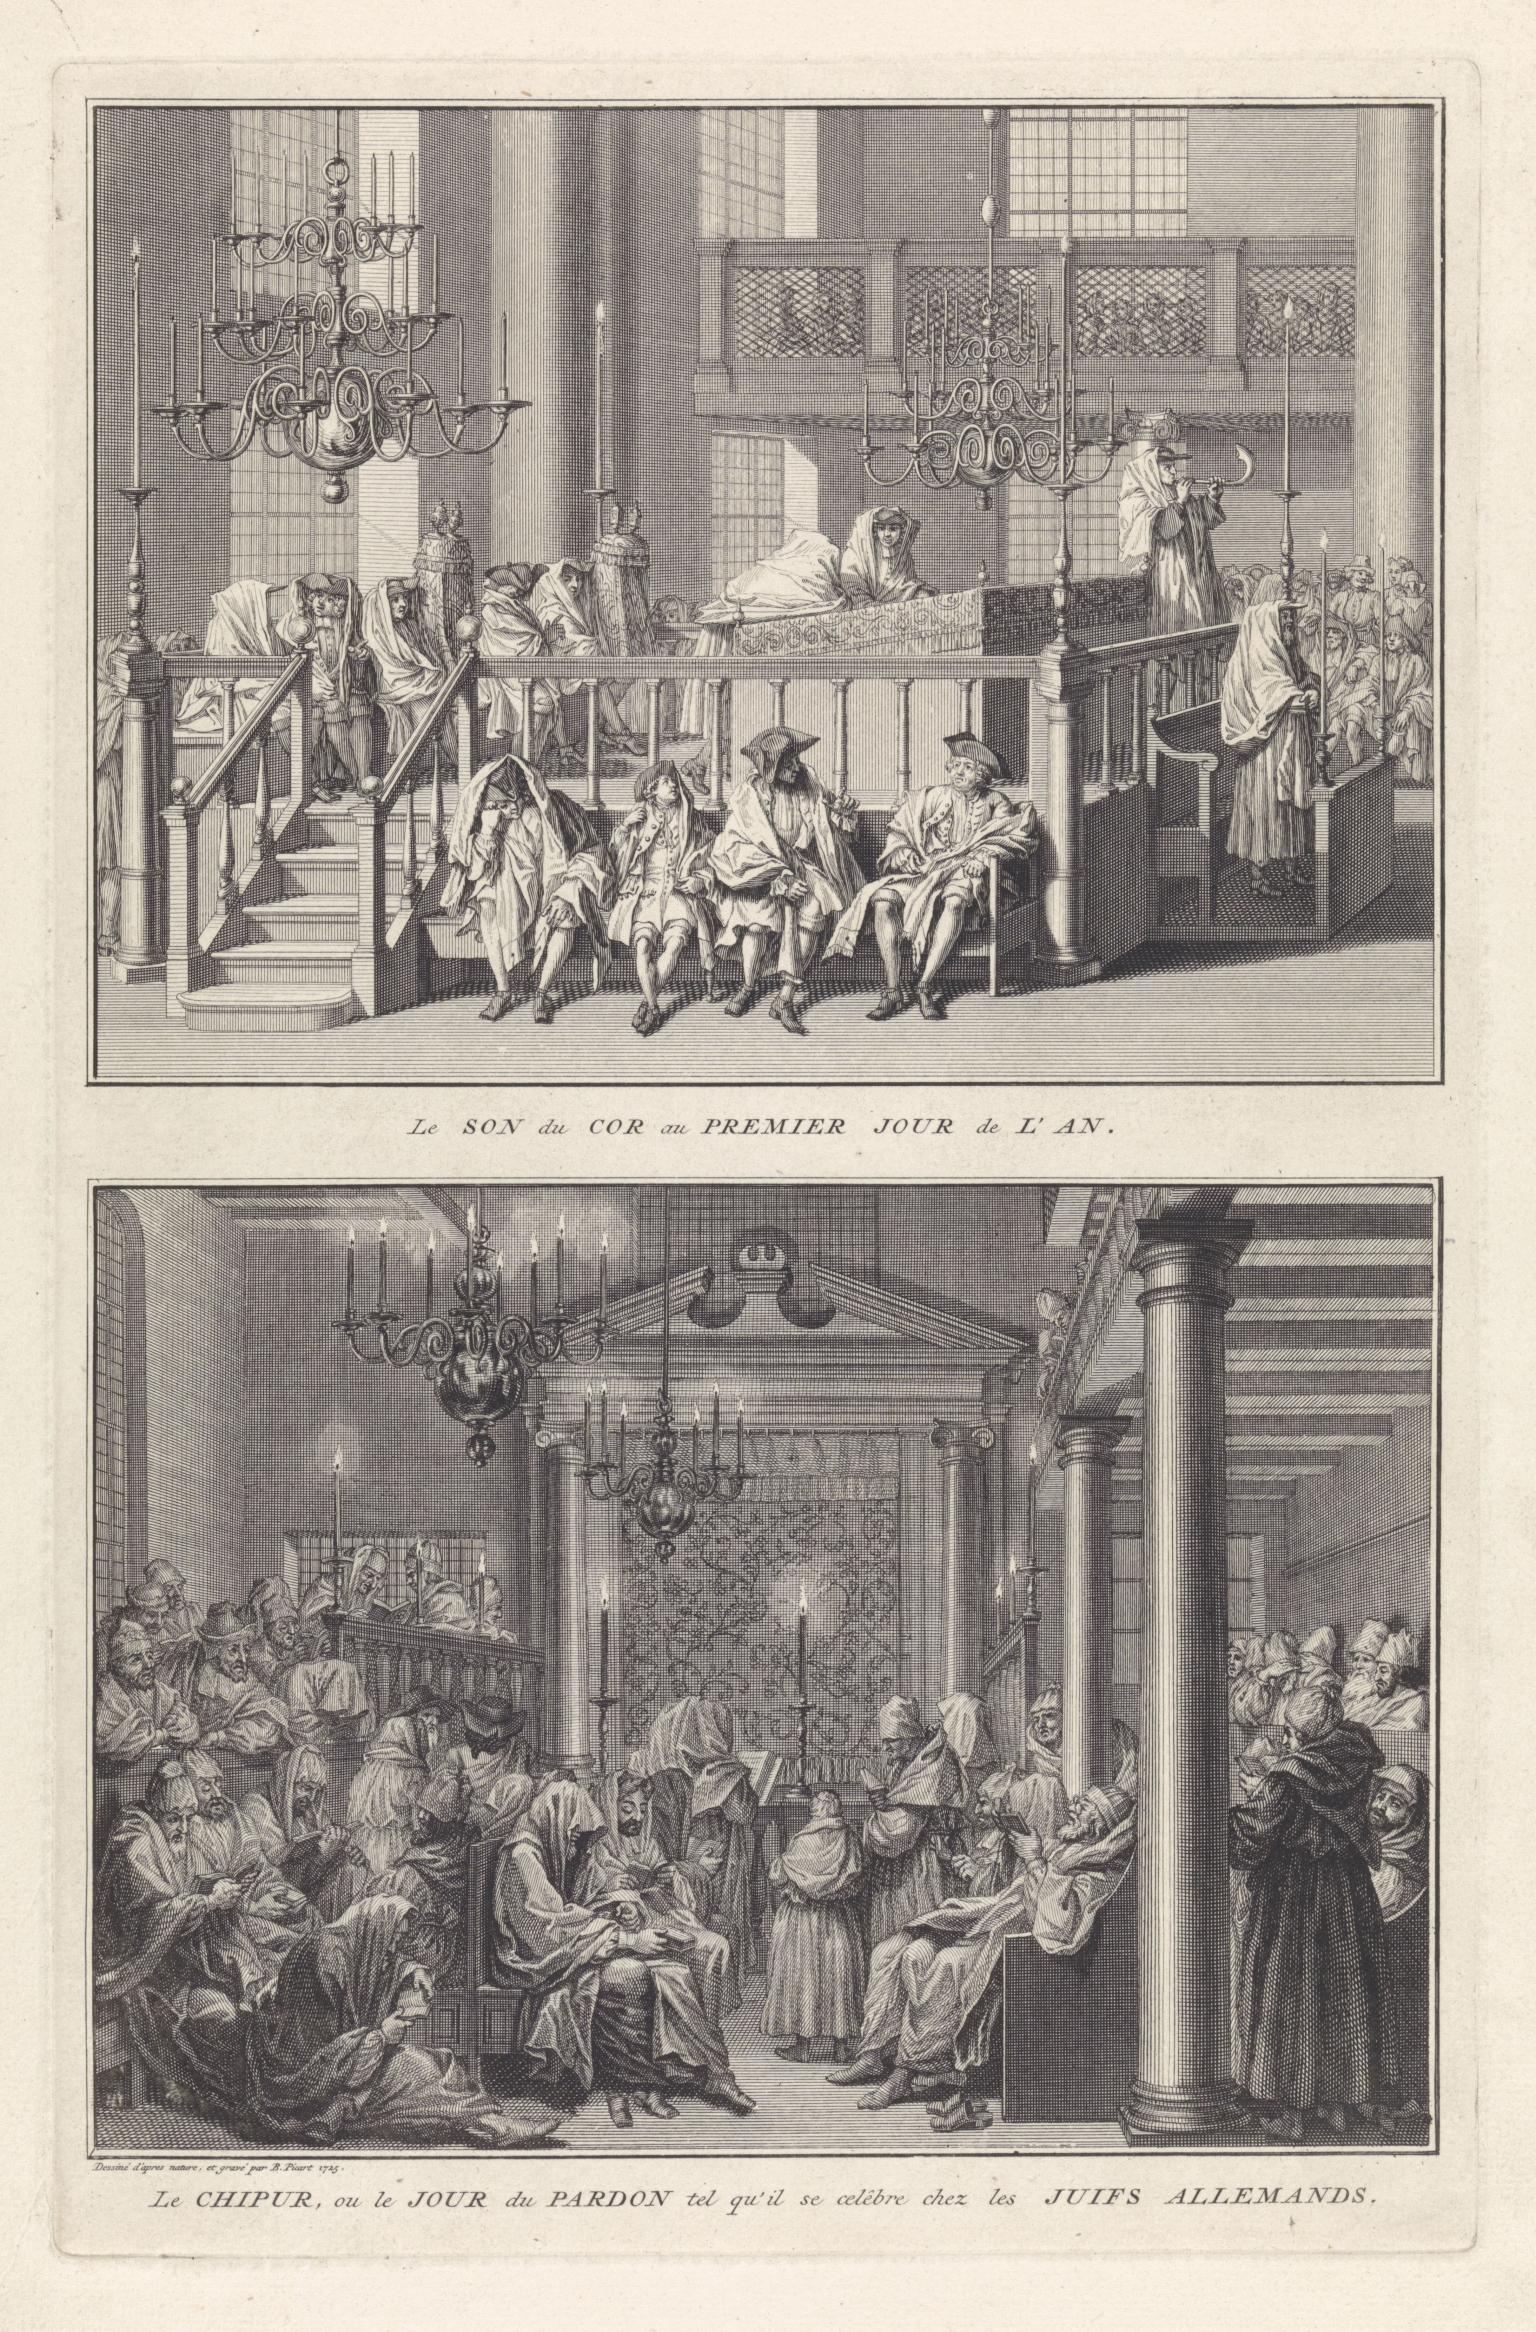 Print depicting two scenes with French text under frames: top shows men in prayer shawls sitting while one man on central platform sounds a ram's horn. Bottom image shows men in prayer shawls sitting and standing in room with several lit candles. 